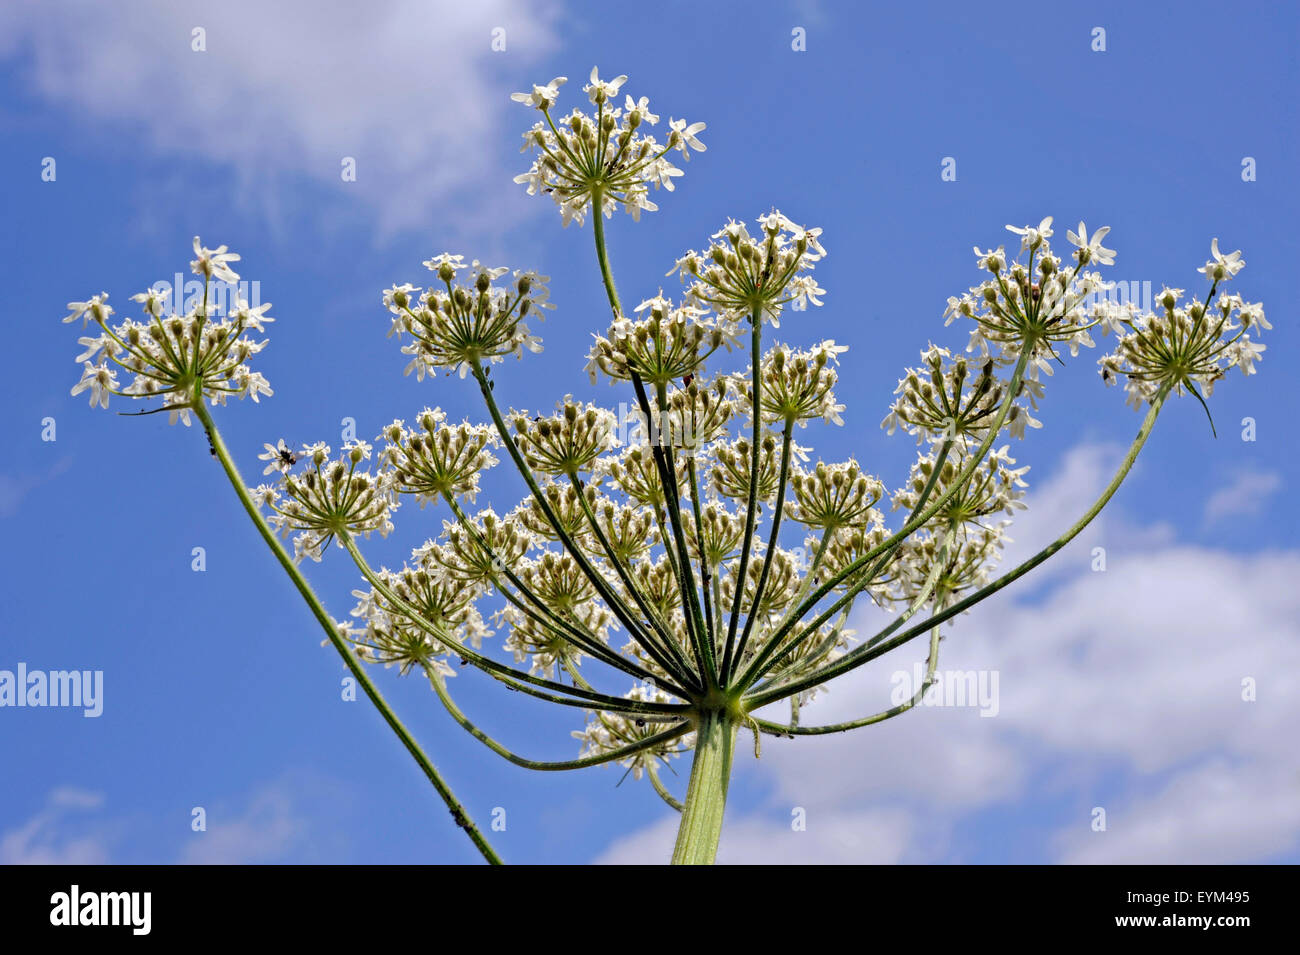 Decorative umbels of the hogweed, good forage crop contains ethereal oils, Stock Photo